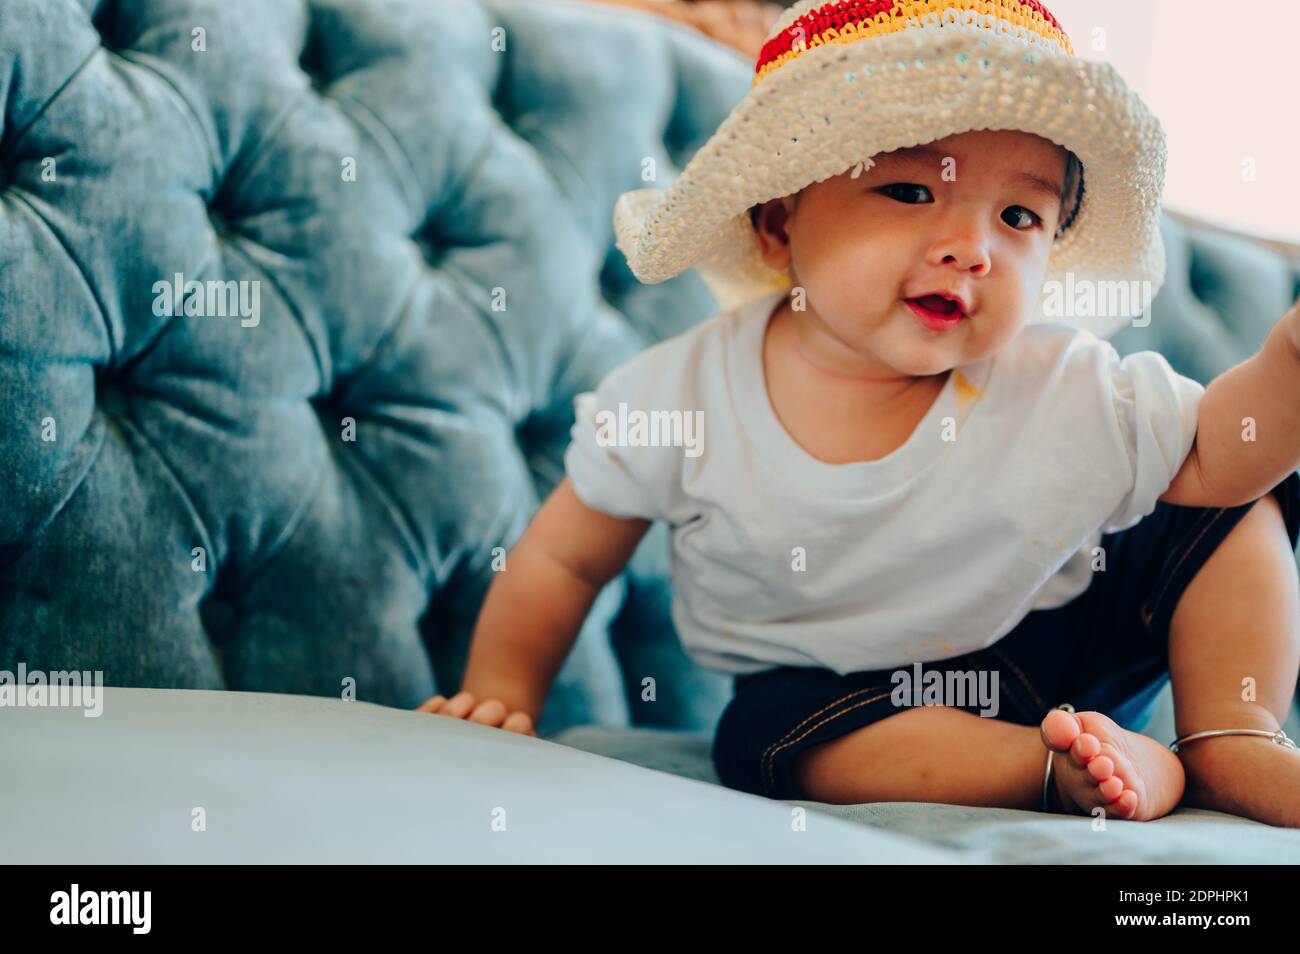 Portrait Of Smiling Baby Boy Sitting On Bed Stock Photo - Alamy